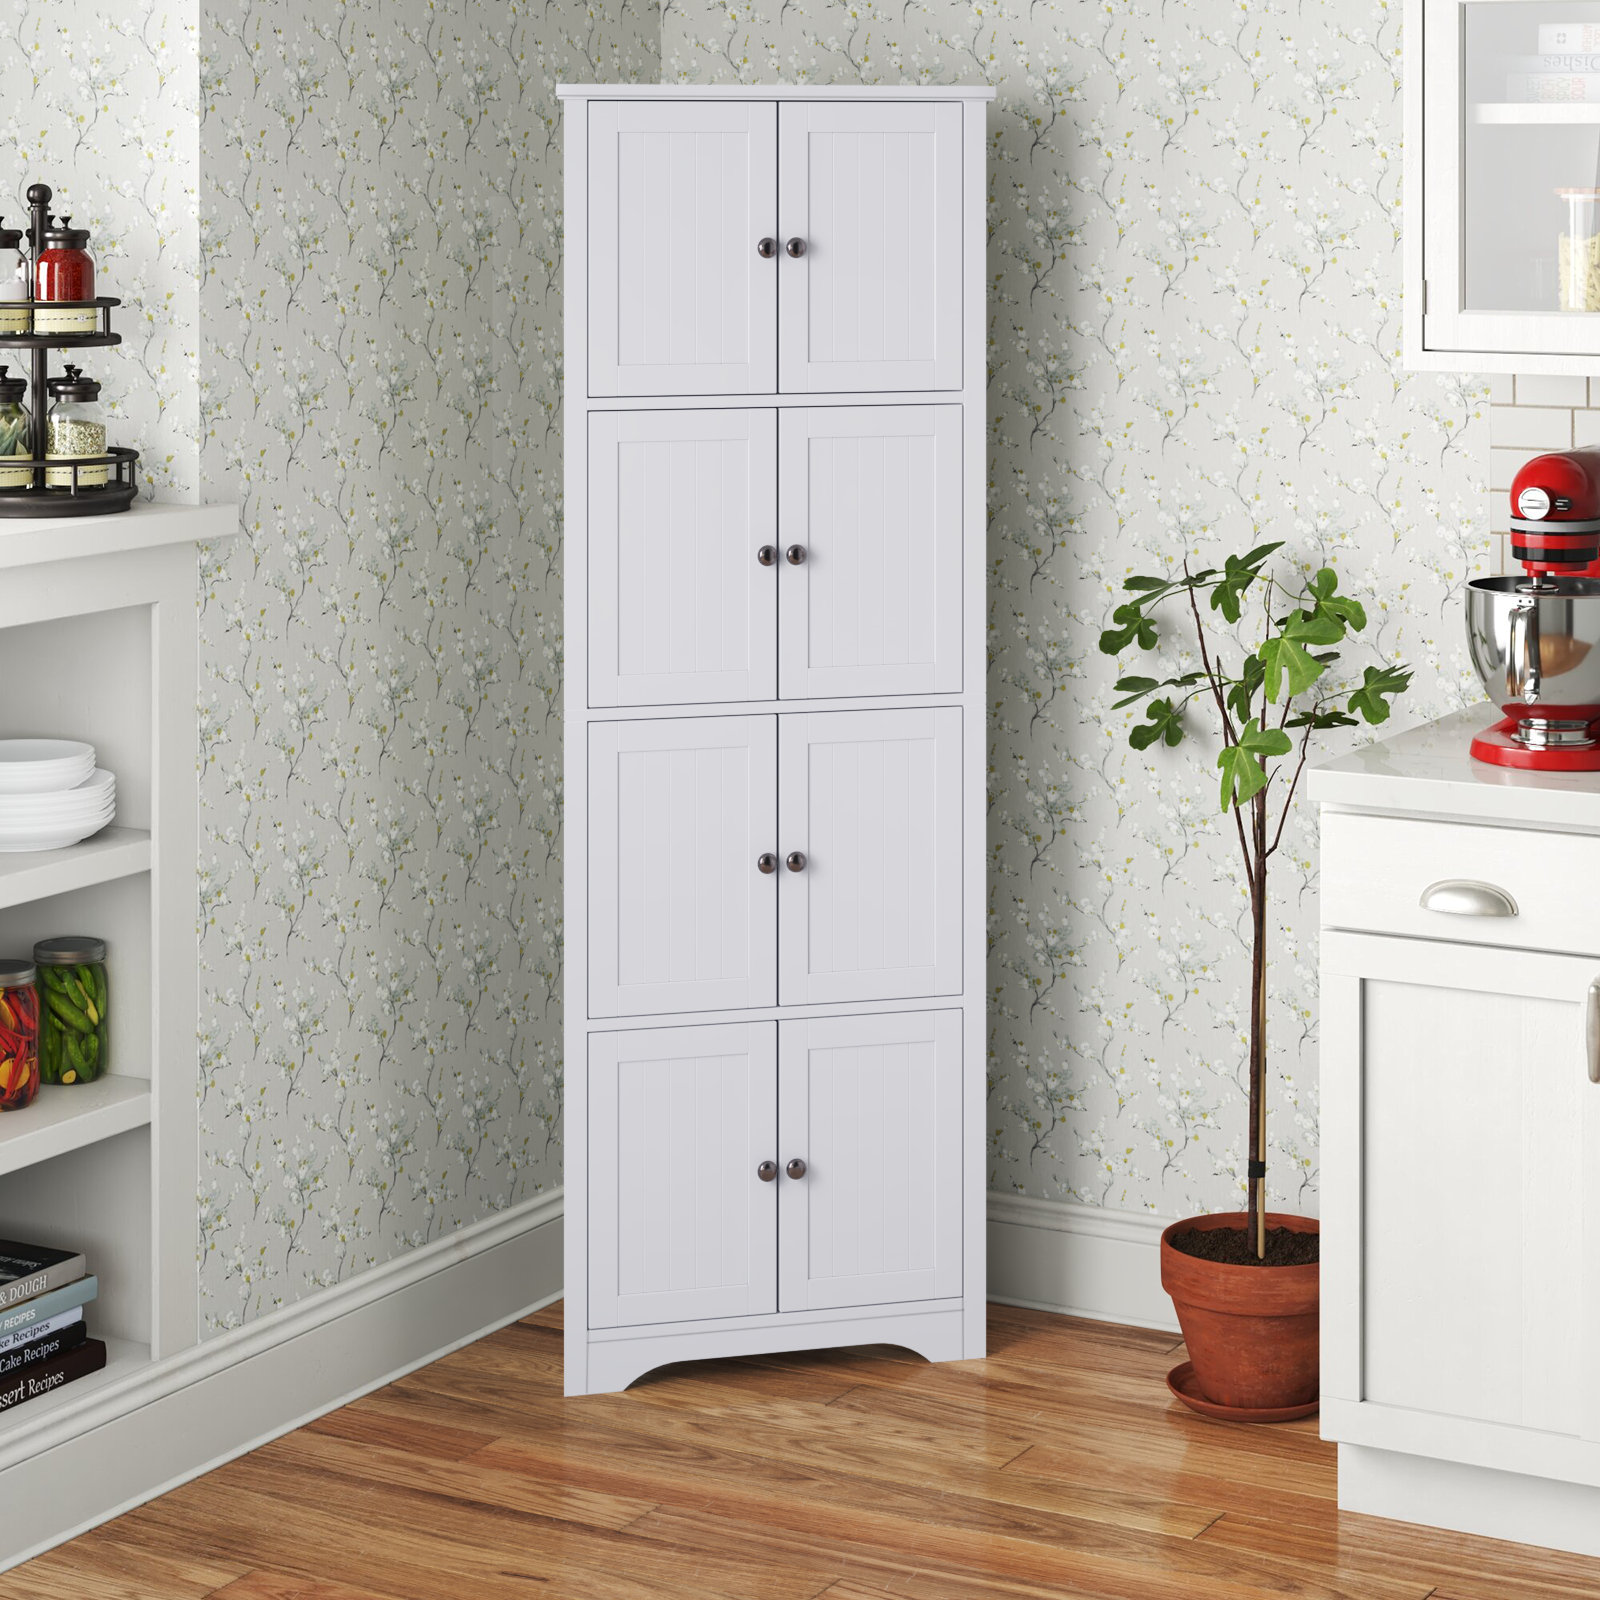 Bathroom Tall Corner Cabinet with Doors and Adjustable Shelves,Grey - Wood Finish